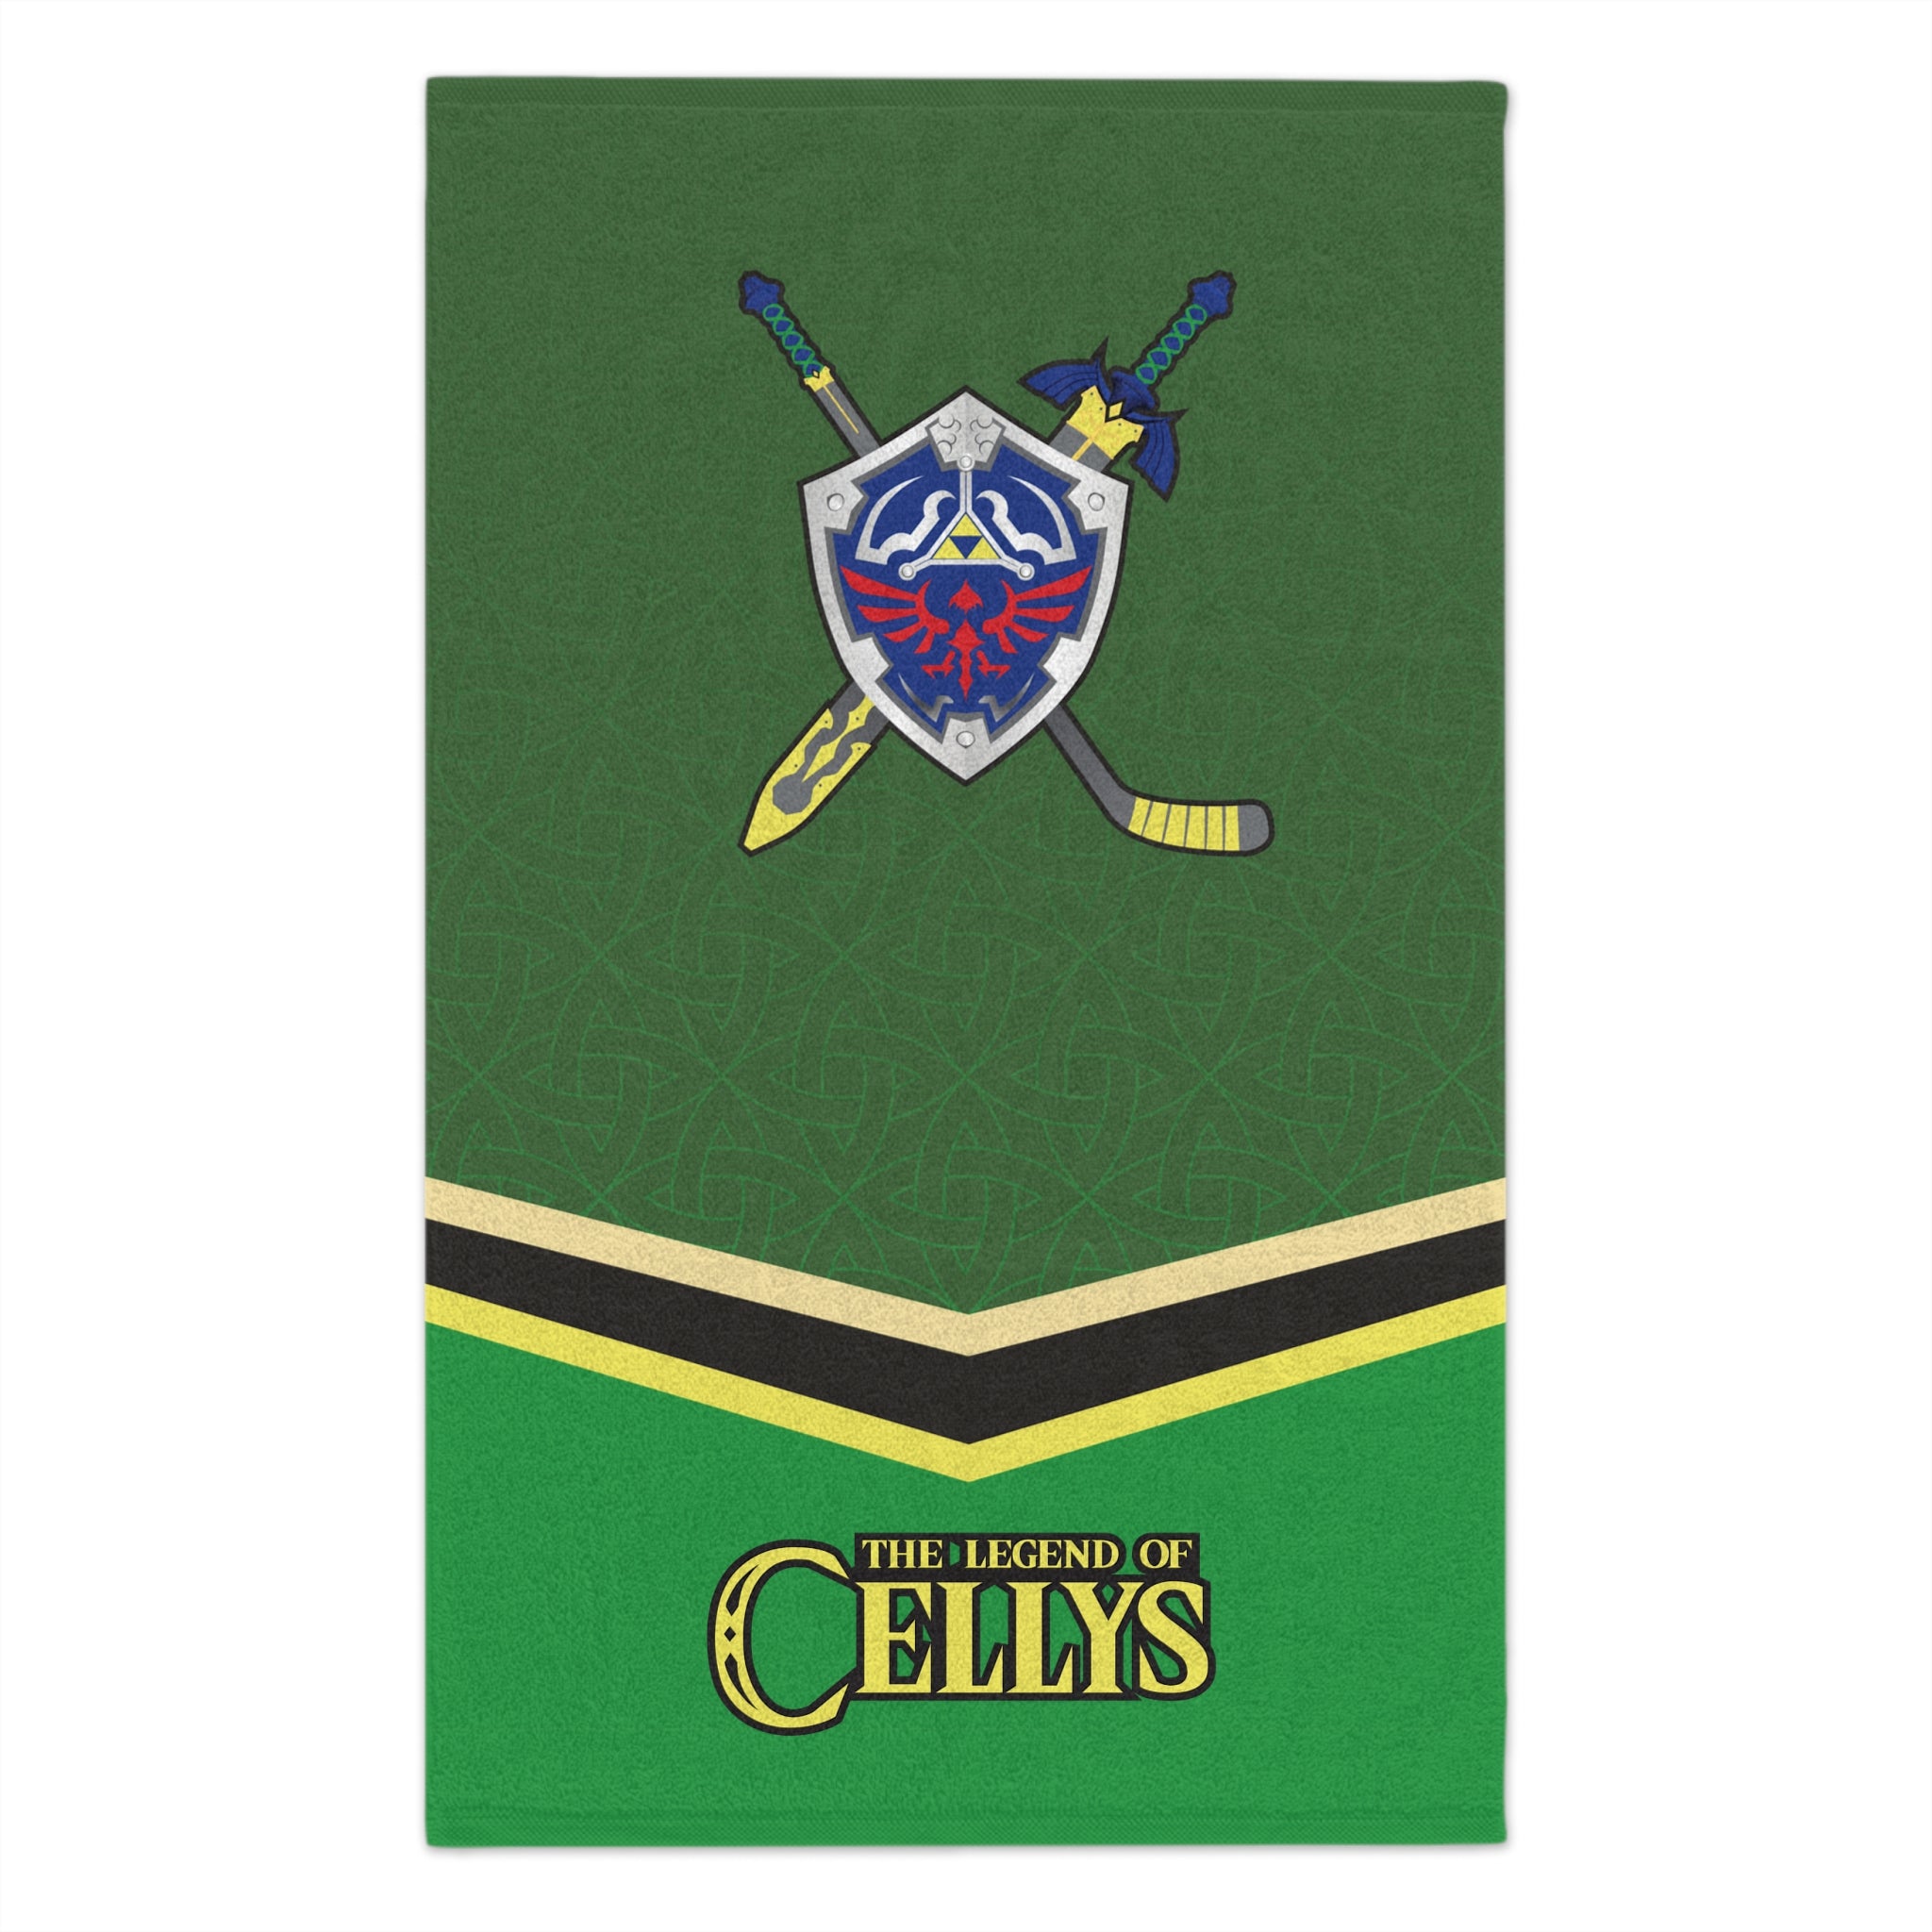 Legend of Cellys Rally Towel